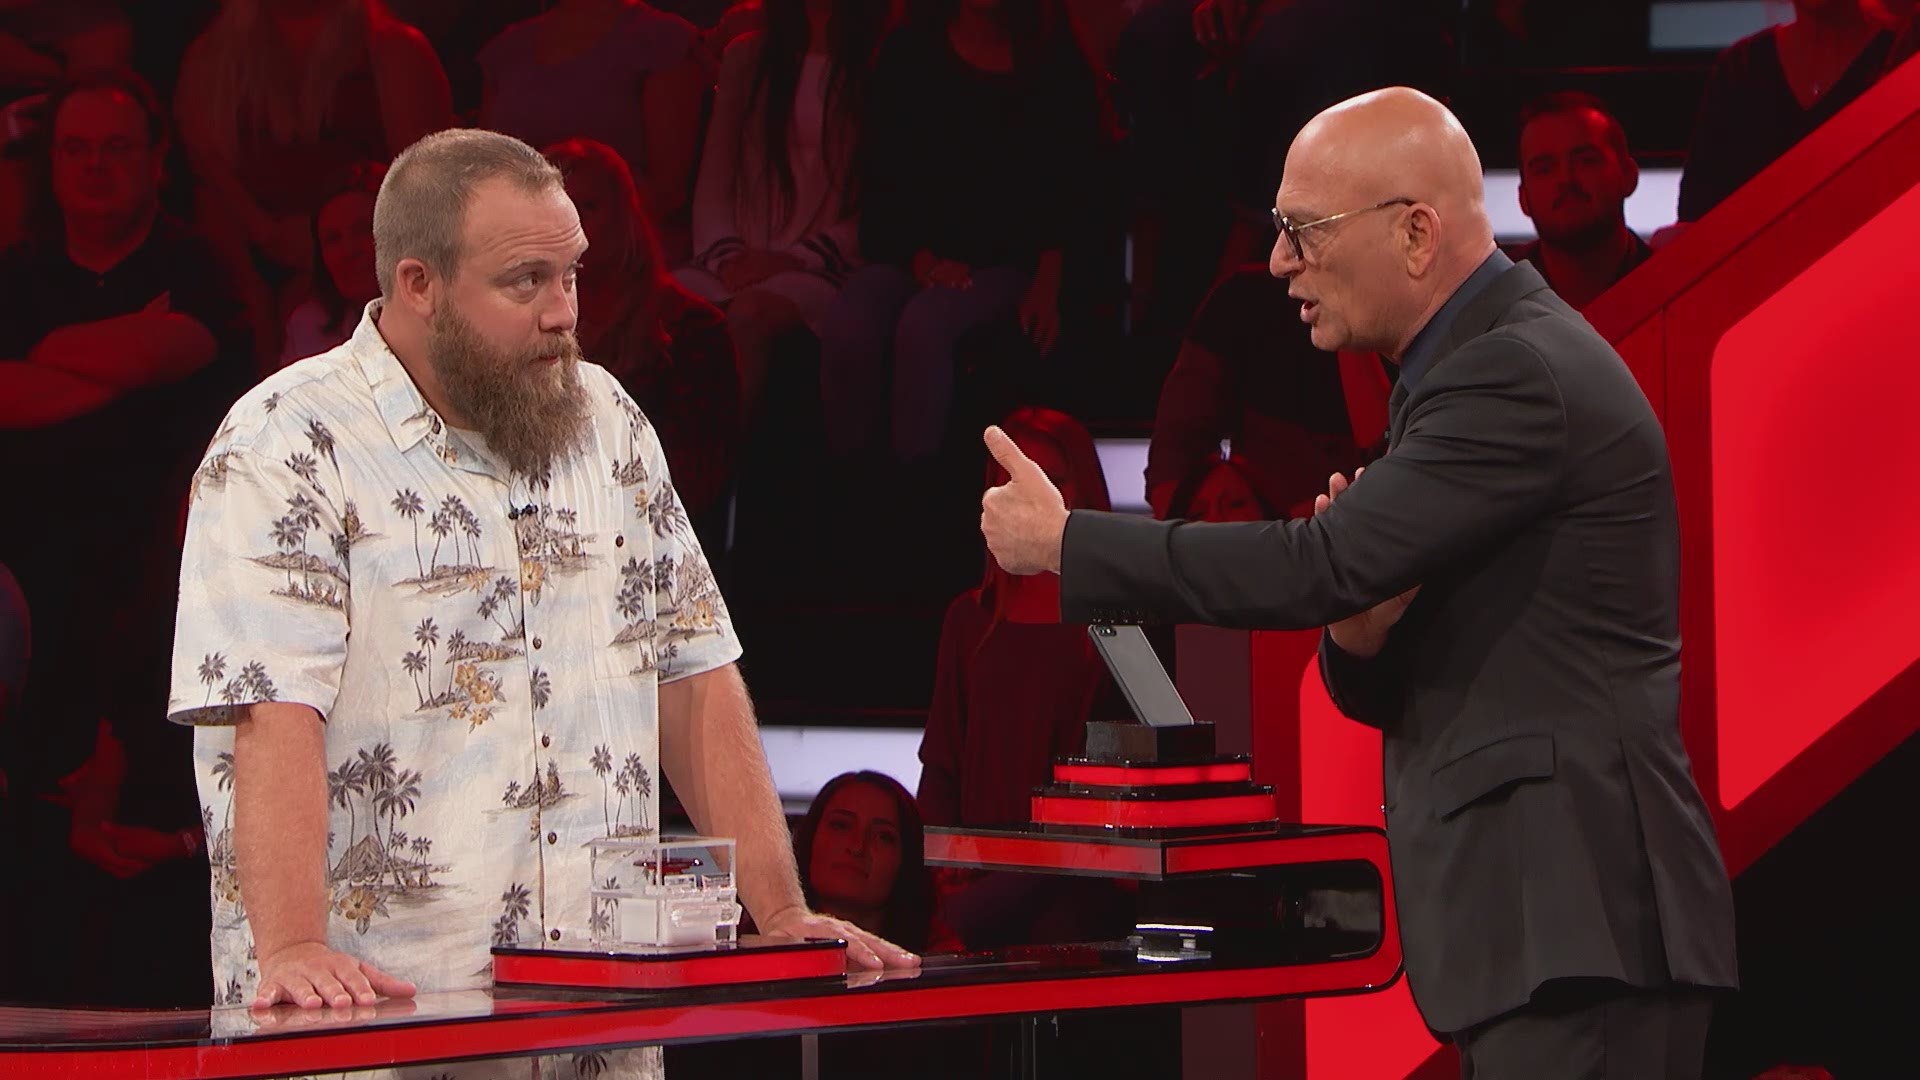 David Leeman of Bucksport said he loved getting to appear on Deal or No Deal but having to shave the beard he has been working on for 19 years was real hard...even for $10,000.